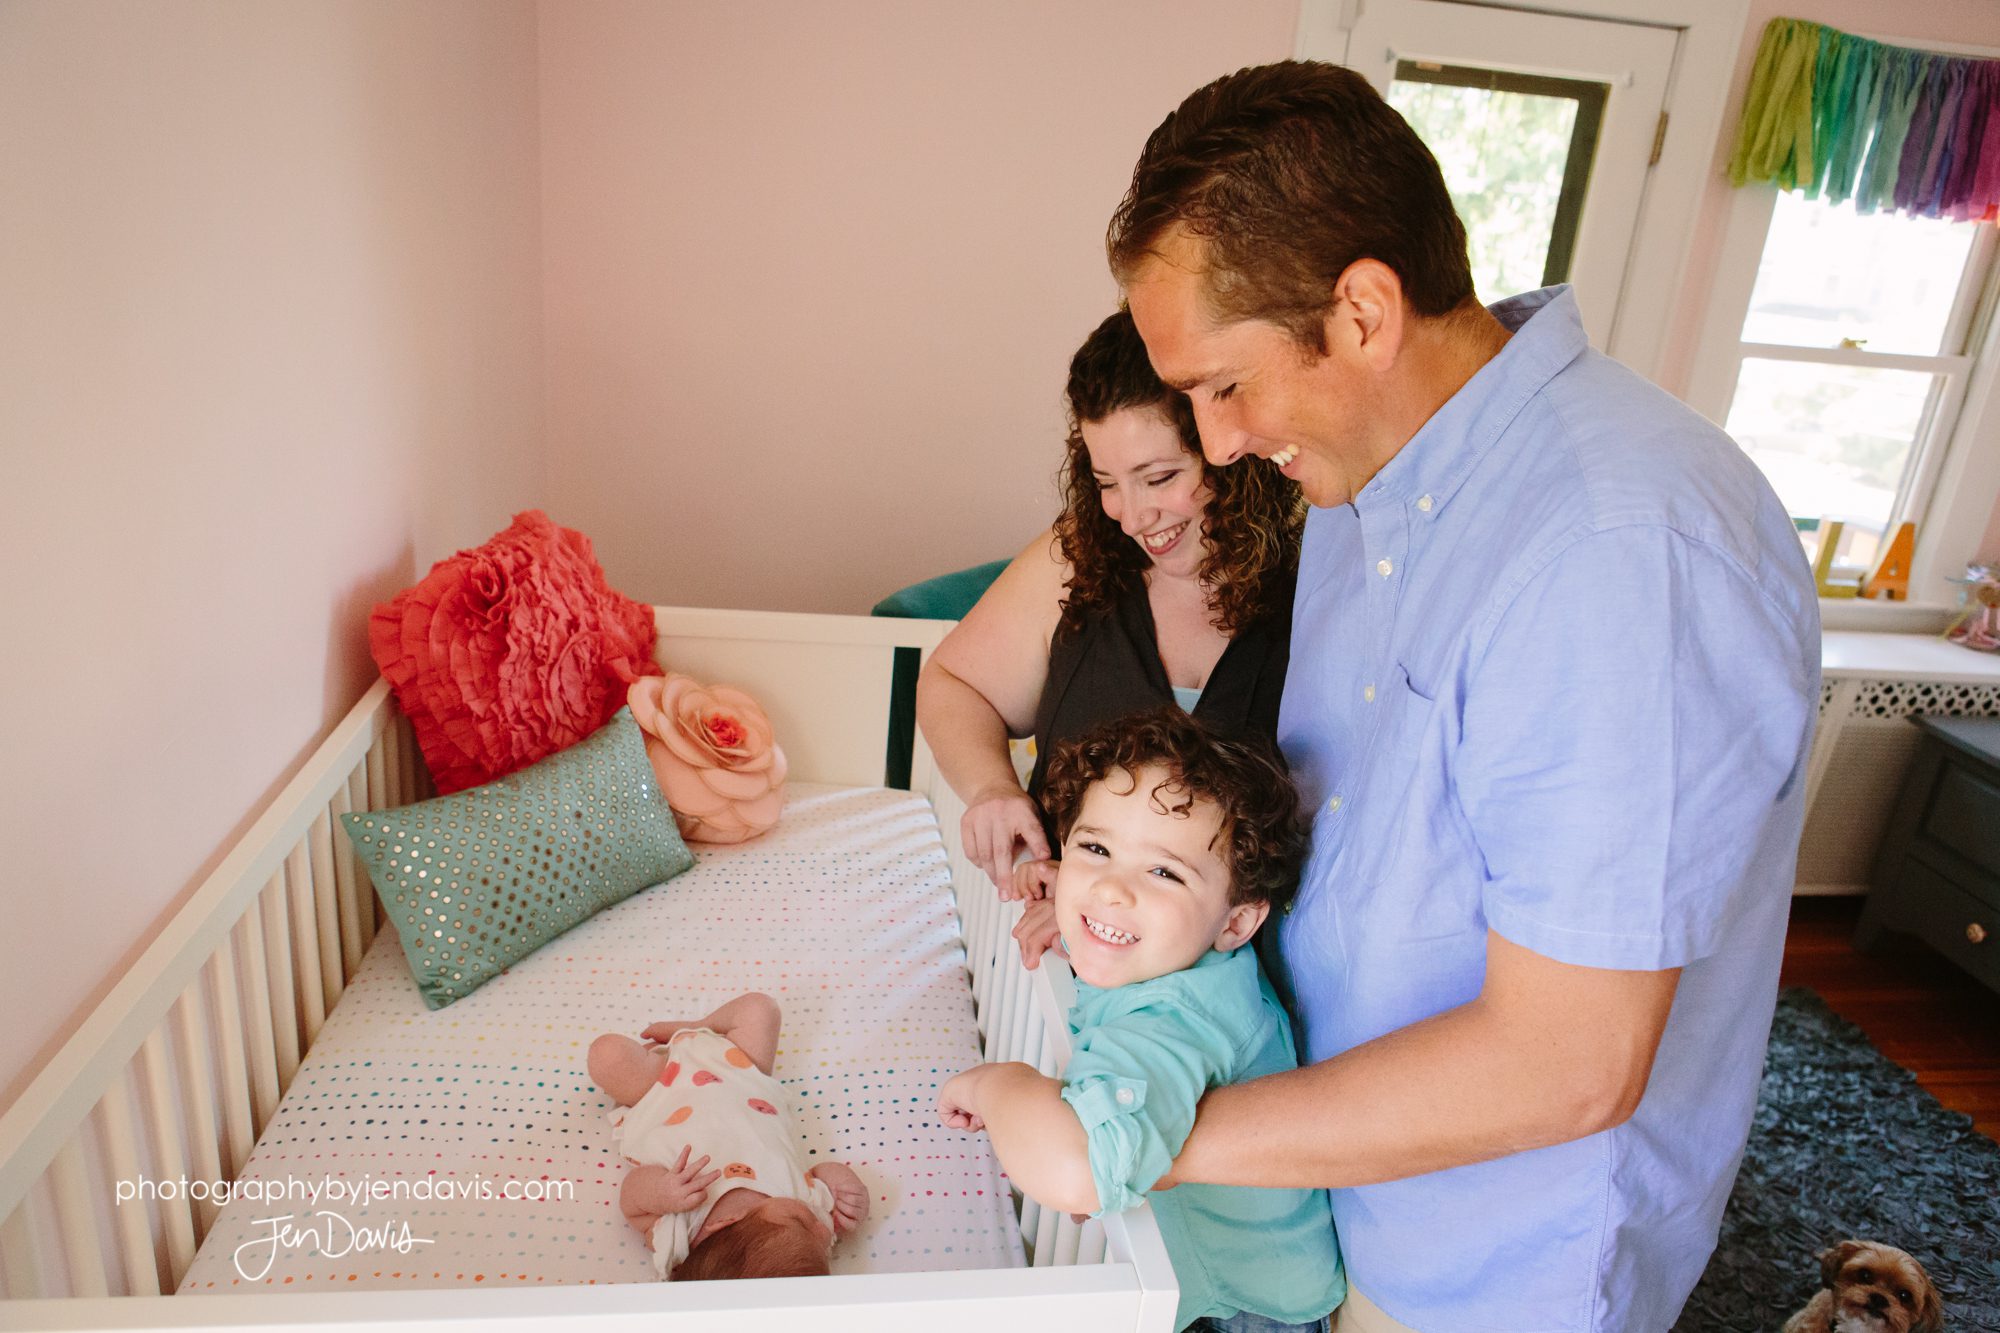 Familyof 4 looking at baby in crib